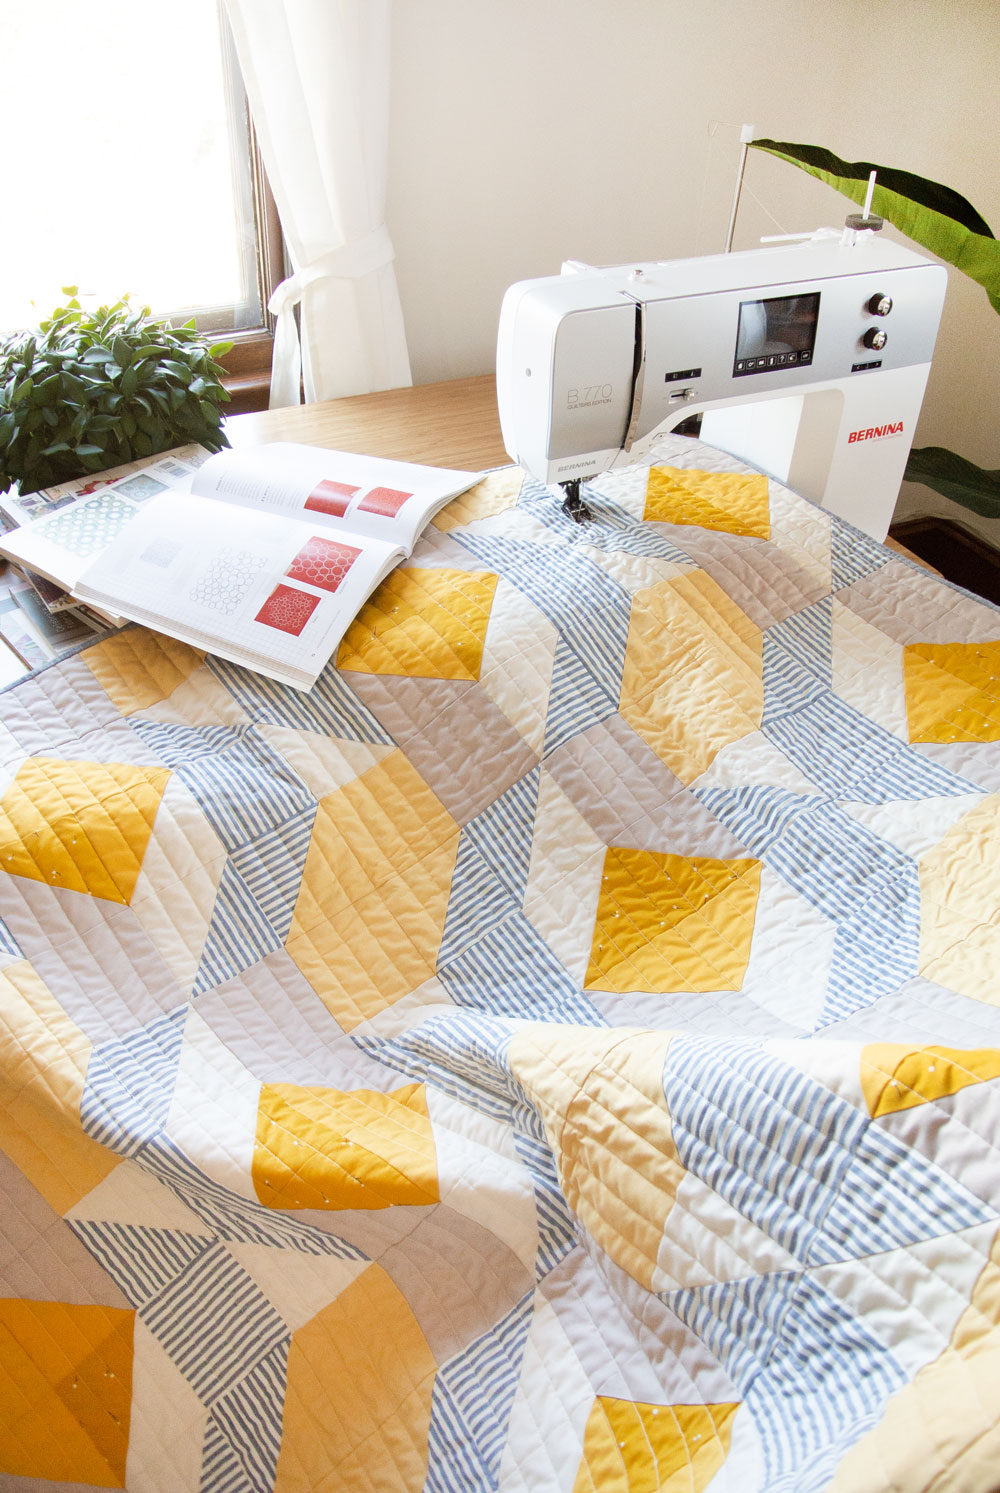 Learn to quilt like a pro on your domestic sewing machine at home. Here are the 5 best books to get you on your way.